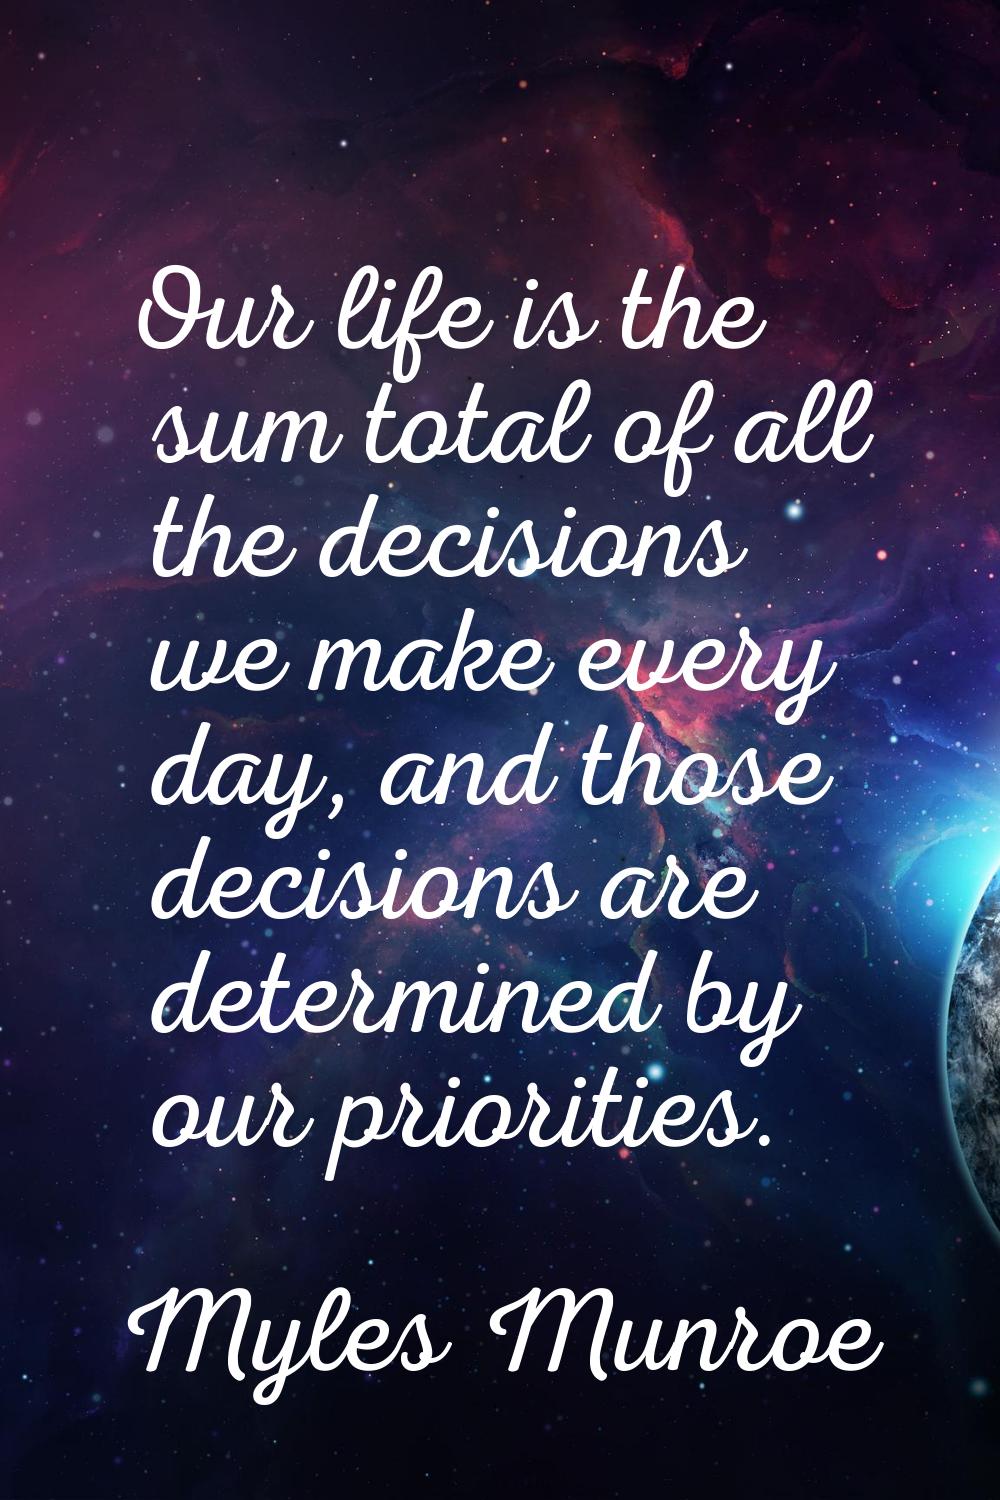 Our life is the sum total of all the decisions we make every day, and those decisions are determine